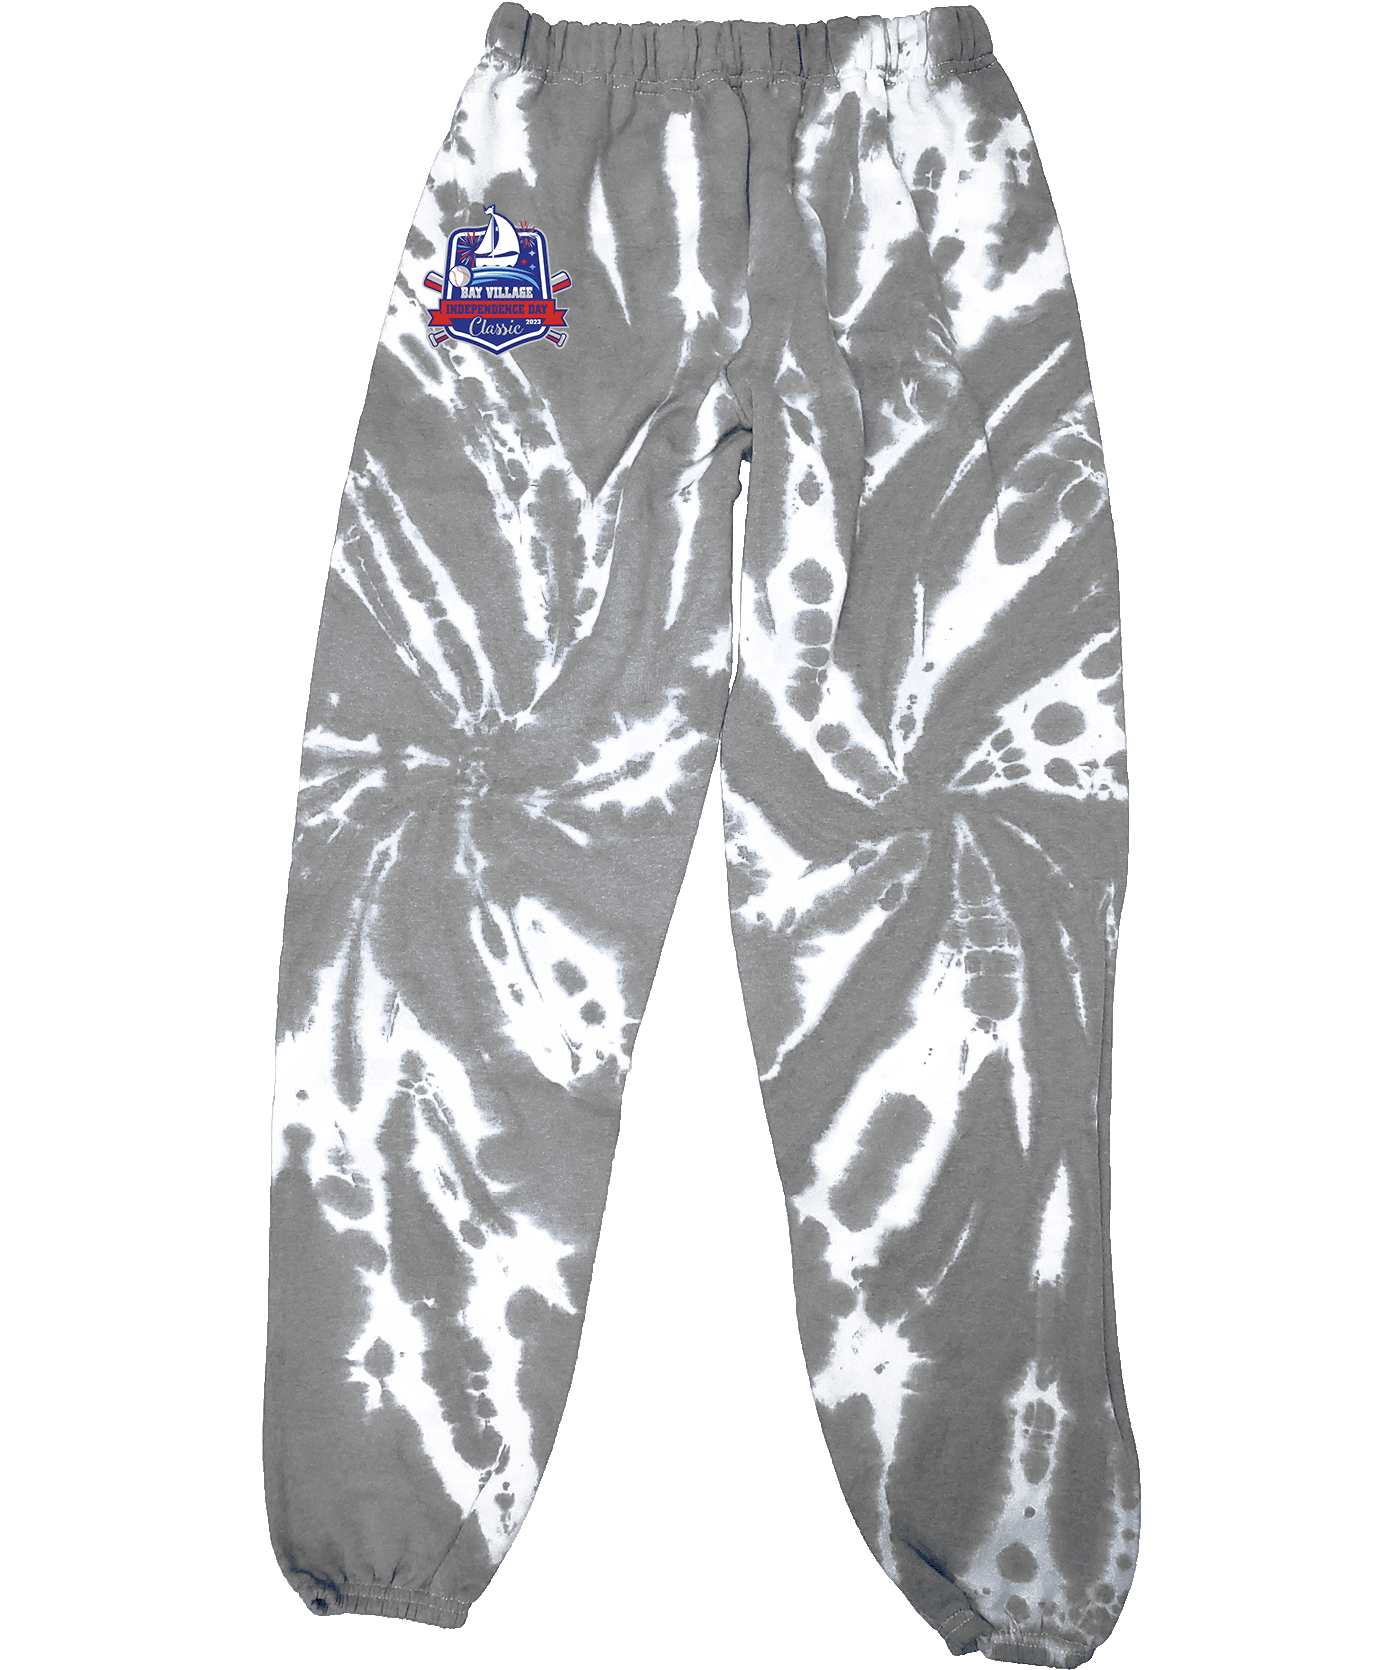 SWEAT PANTS - 2023 Bay Village Independence Day Classic